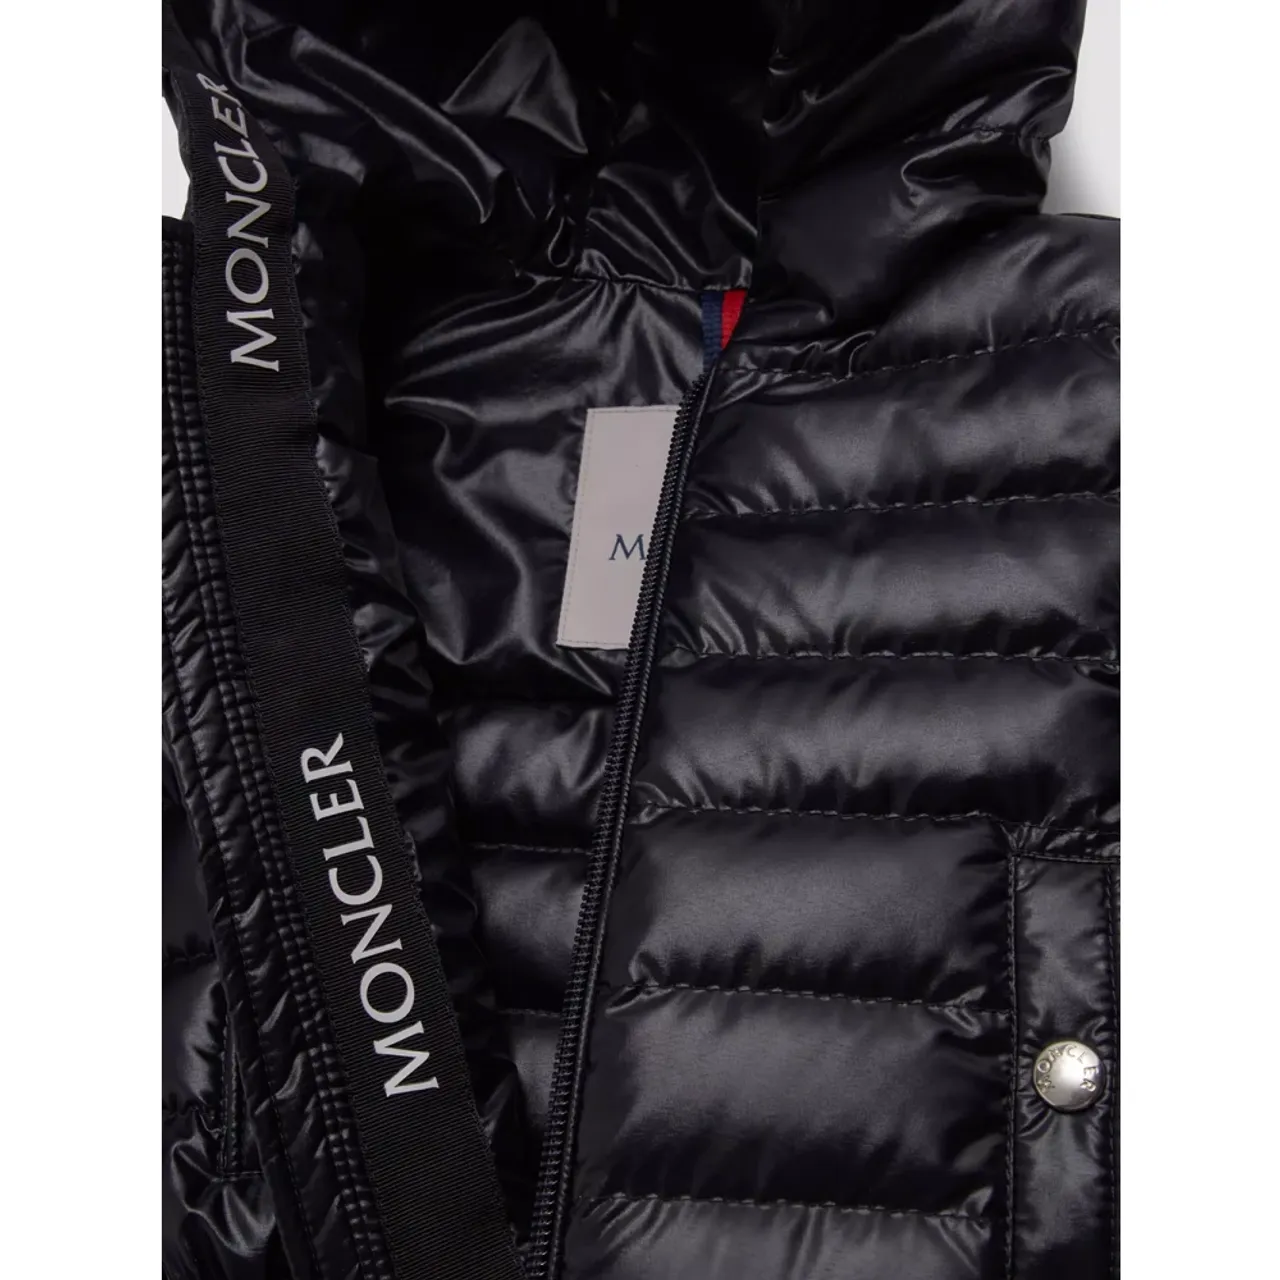 Moncler , Blue Kids Coats with Hood and Zip Closure ,Blue male, Sizes: